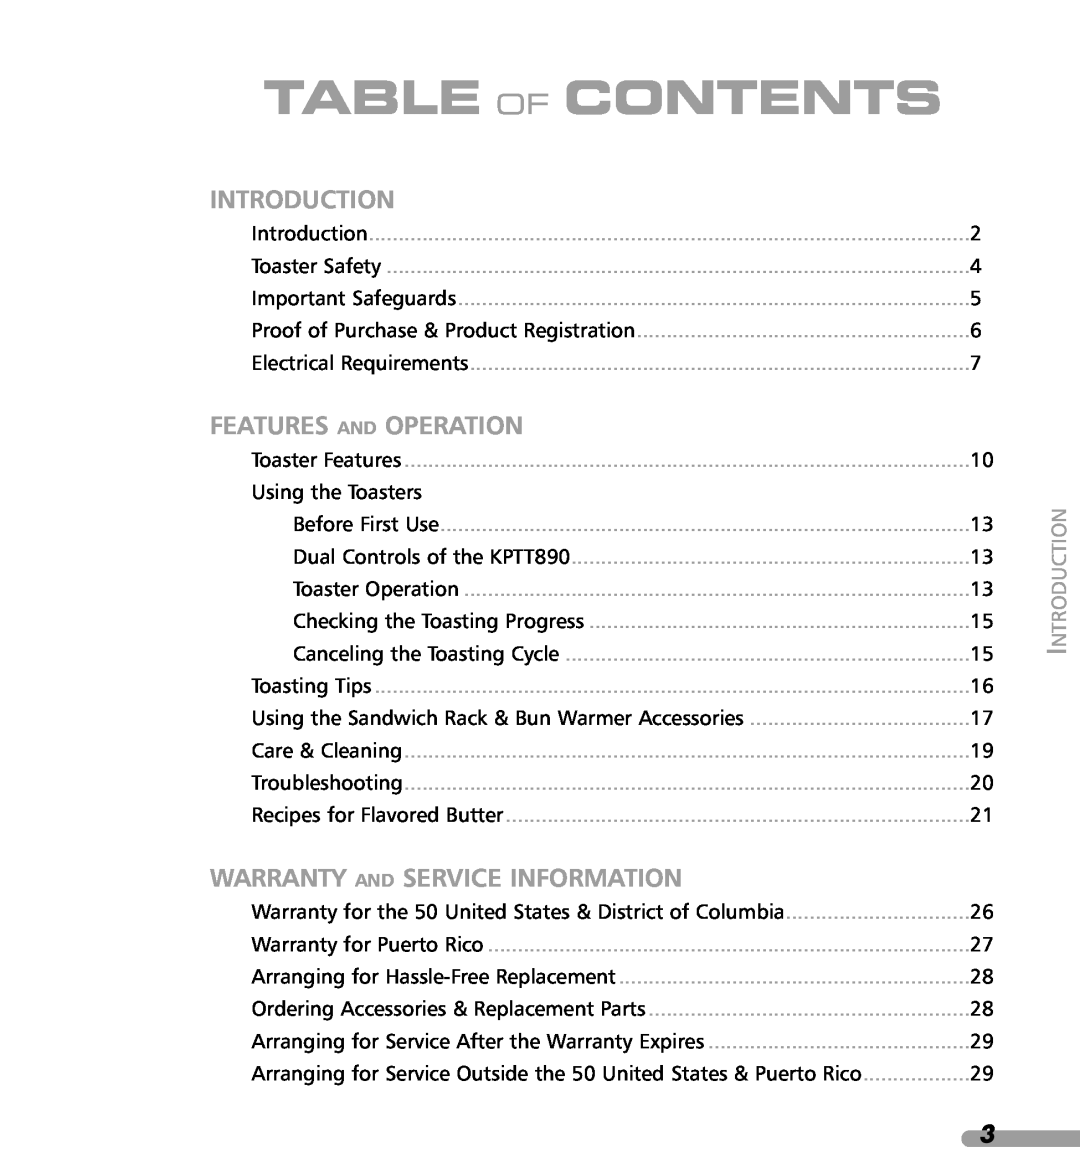 KitchenAid KPTT780, KPTT890 manual Table Of Contents, Introduction, Features And Operation, Warranty And Service Information 